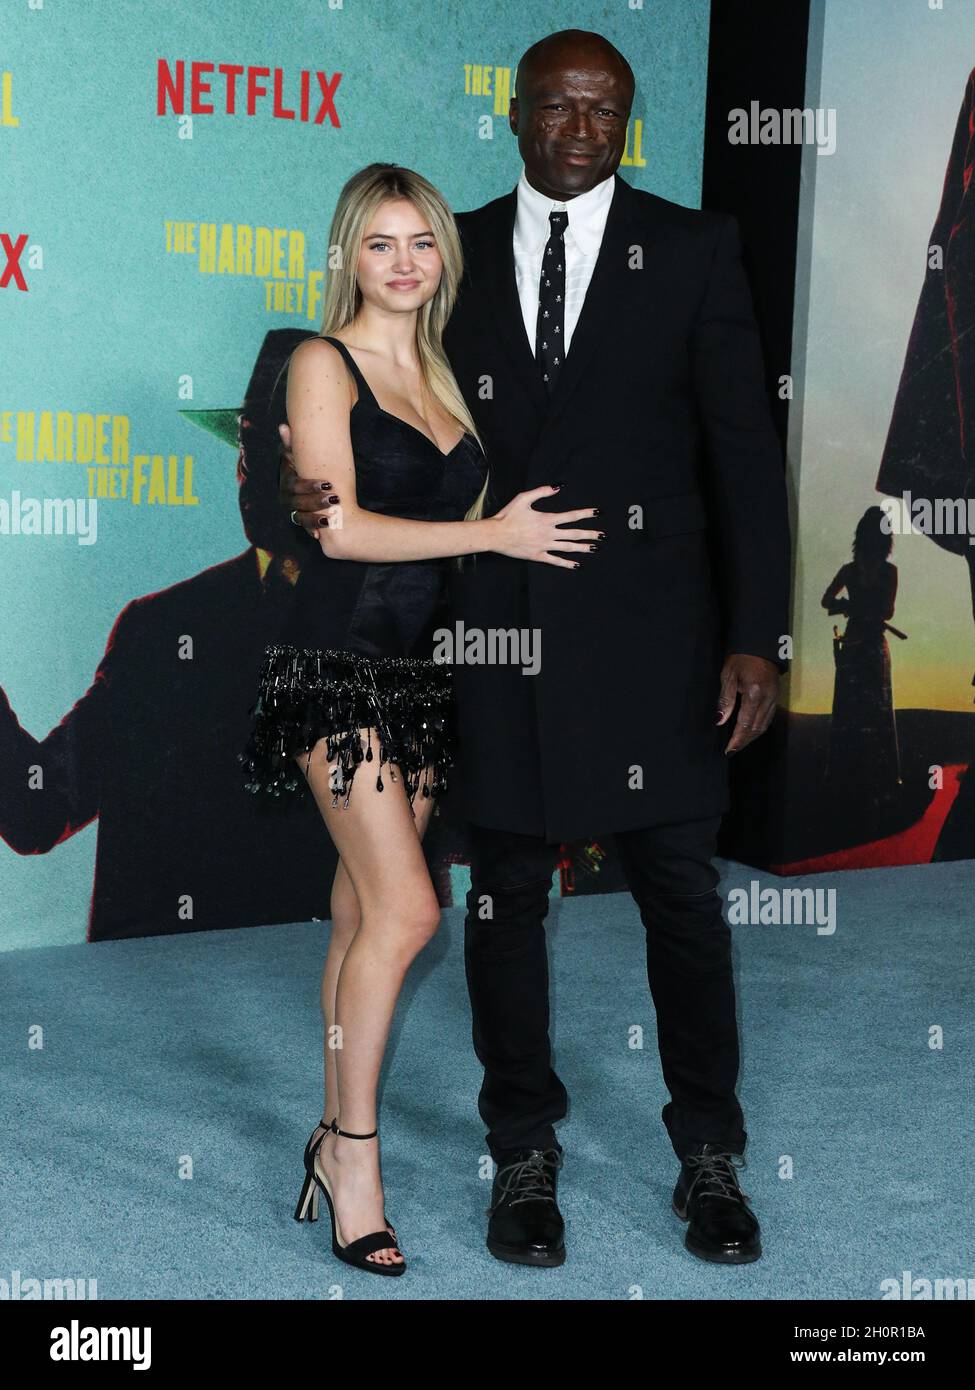 LOS ANGELES, CALIFORNIA, USA - OCTOBER 13: Model Leni Olumi Klum and singer-songwriter Seal (Henry Olusegun Adeola Samuel) arrive at the Los Angeles Premiere Of Netflix's 'The Harder They Fall' held at the Shrine Auditorium and Expo Hall on October 13, 2021 in Los Angeles, California, United States. (Photo by Xavier Collin/Image Press Agency) Stock Photo